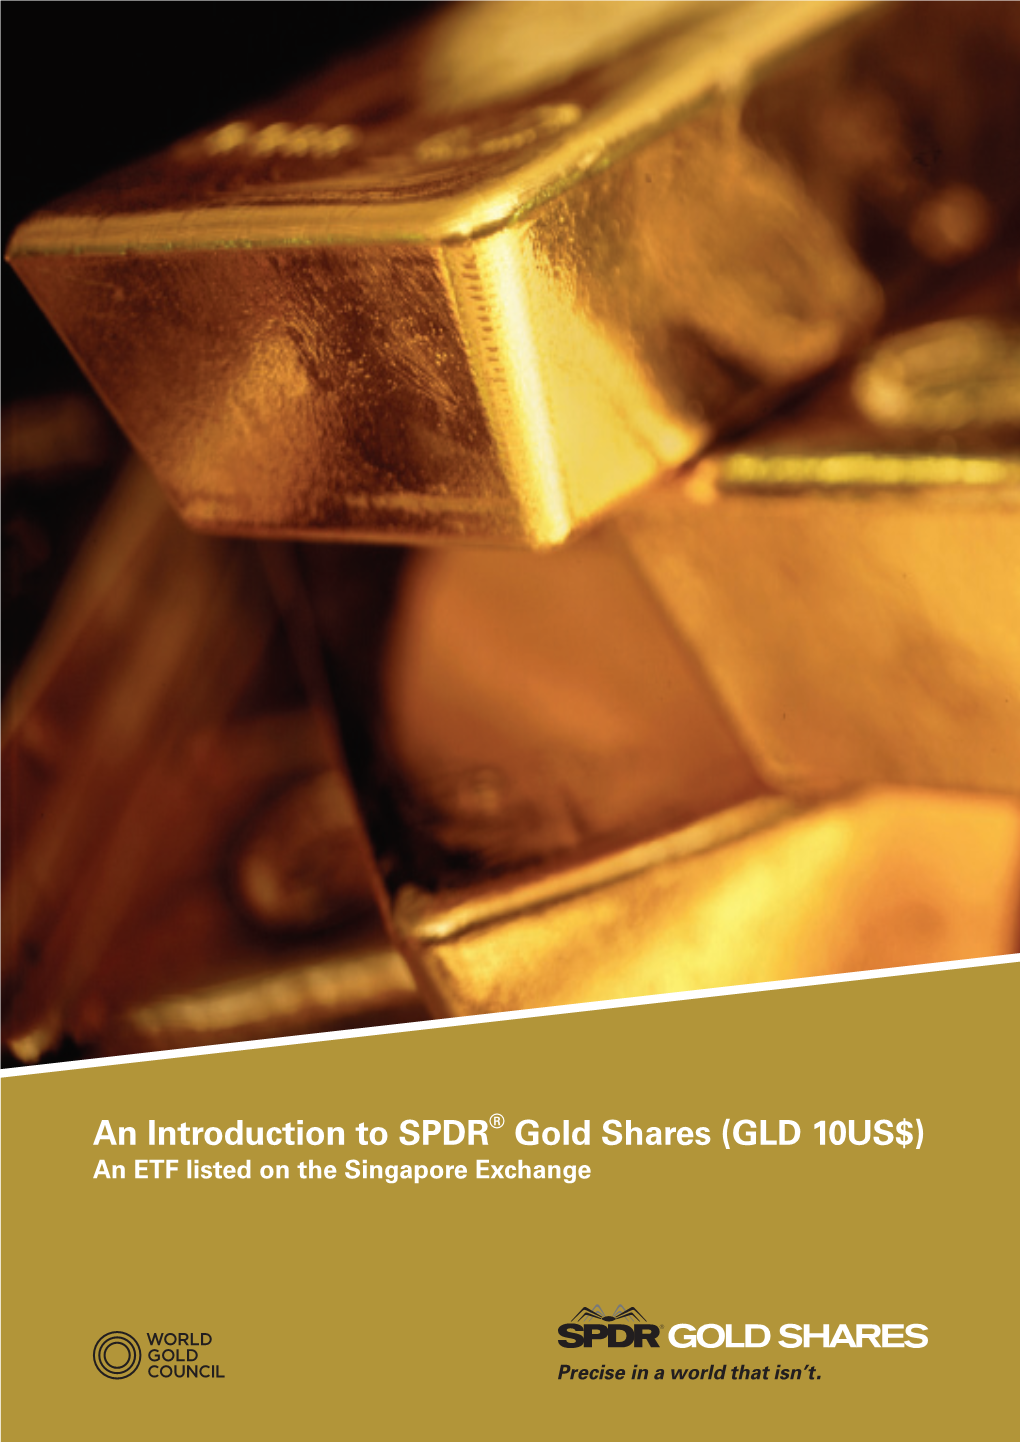 An Introduction to SPDR® Gold Shares (GLD 10US$)